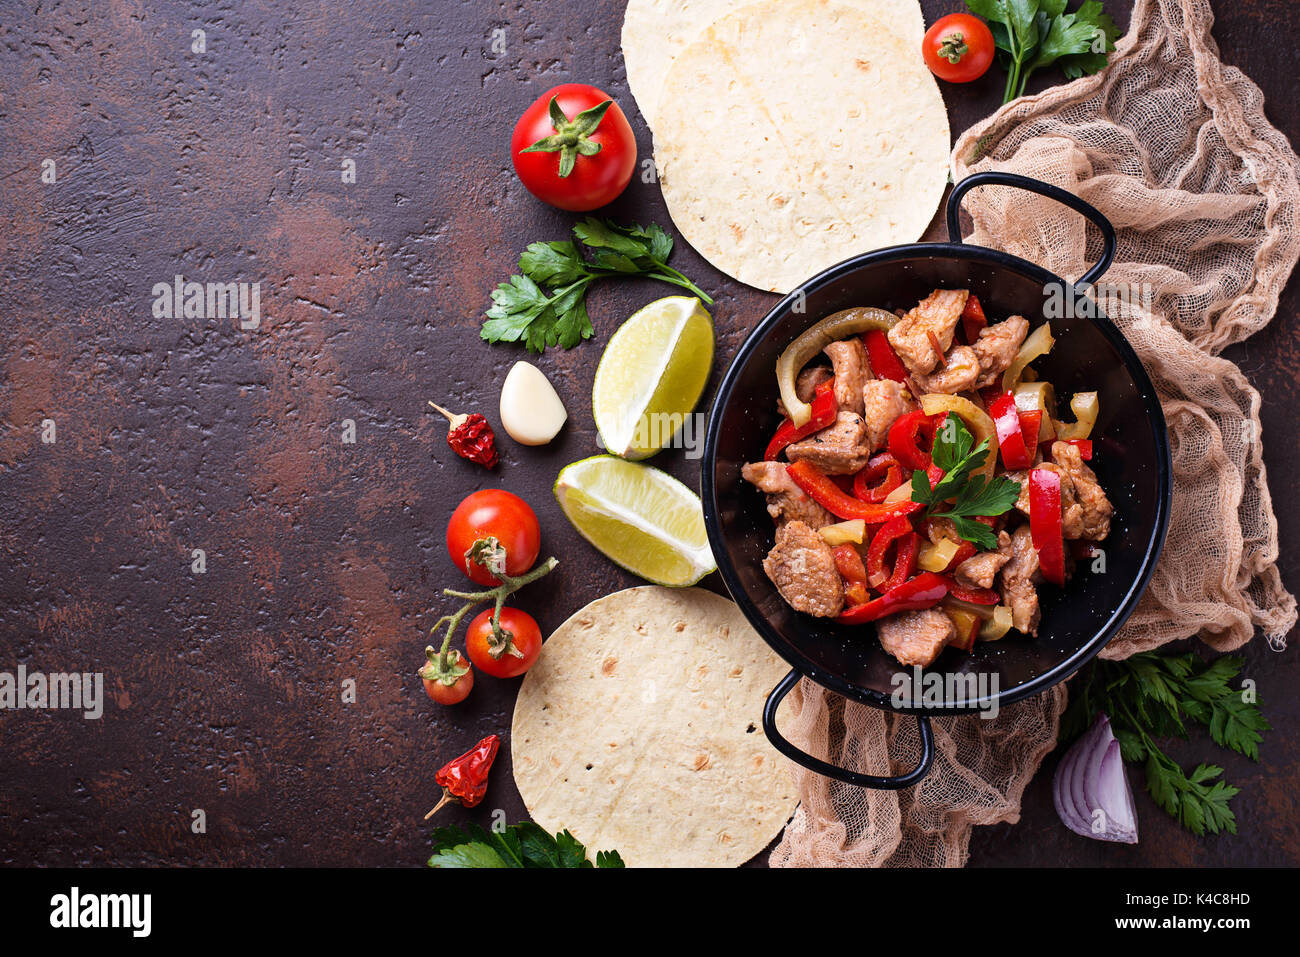 Fajitas with peppers for cooking Mexican tacos. Top view Stock Photo